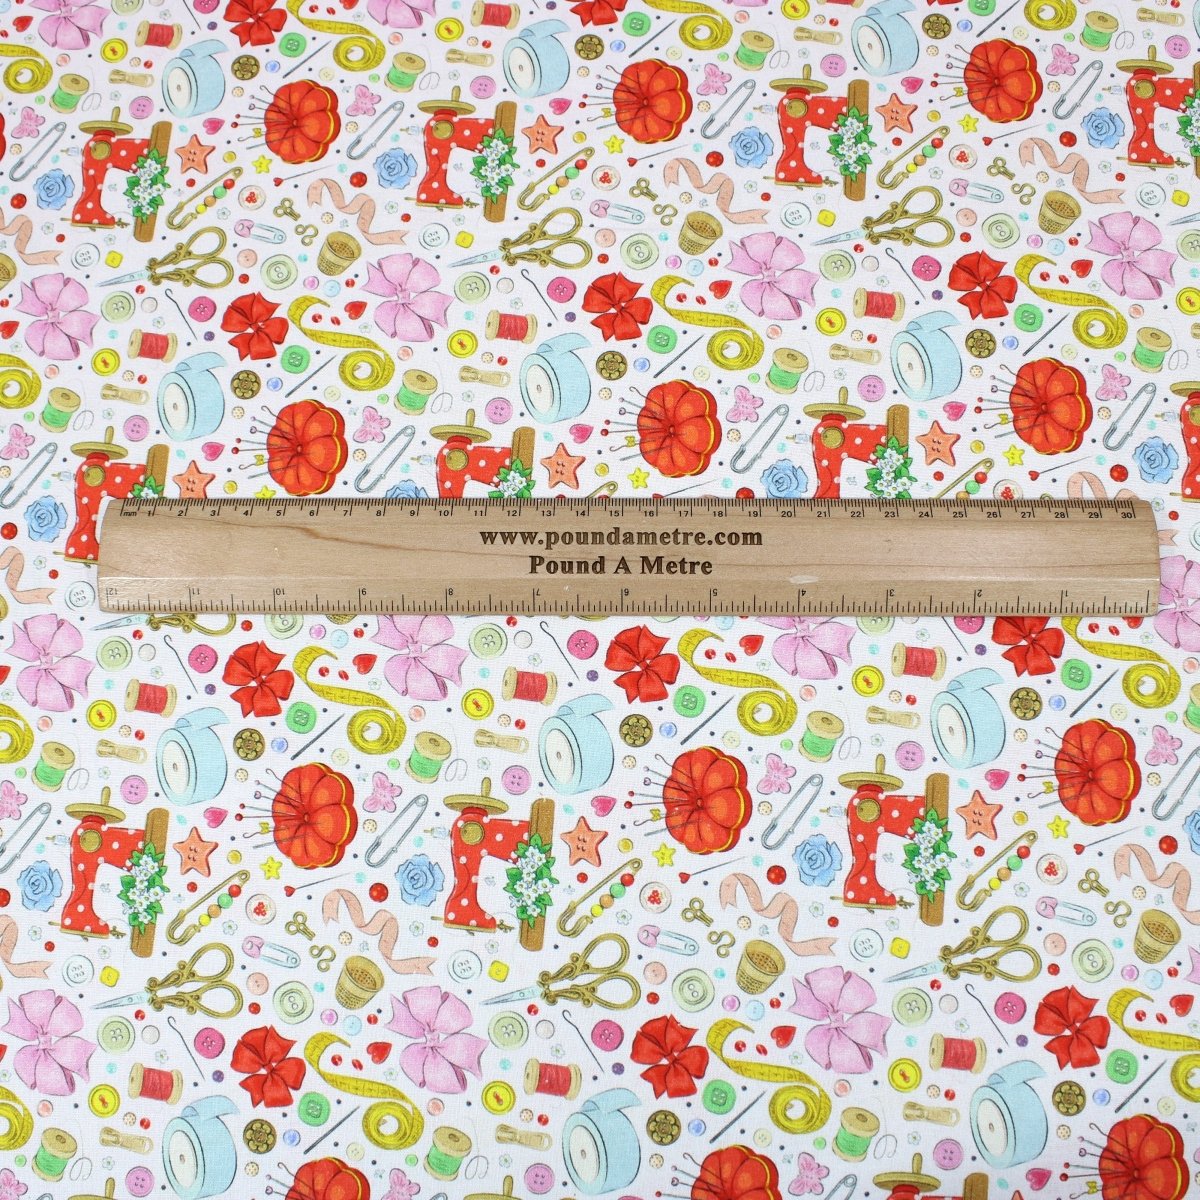 Per Metre Digitally Printed 100% Cotton- 45" Wide (Whimsical Sewing) - Pound A Metre